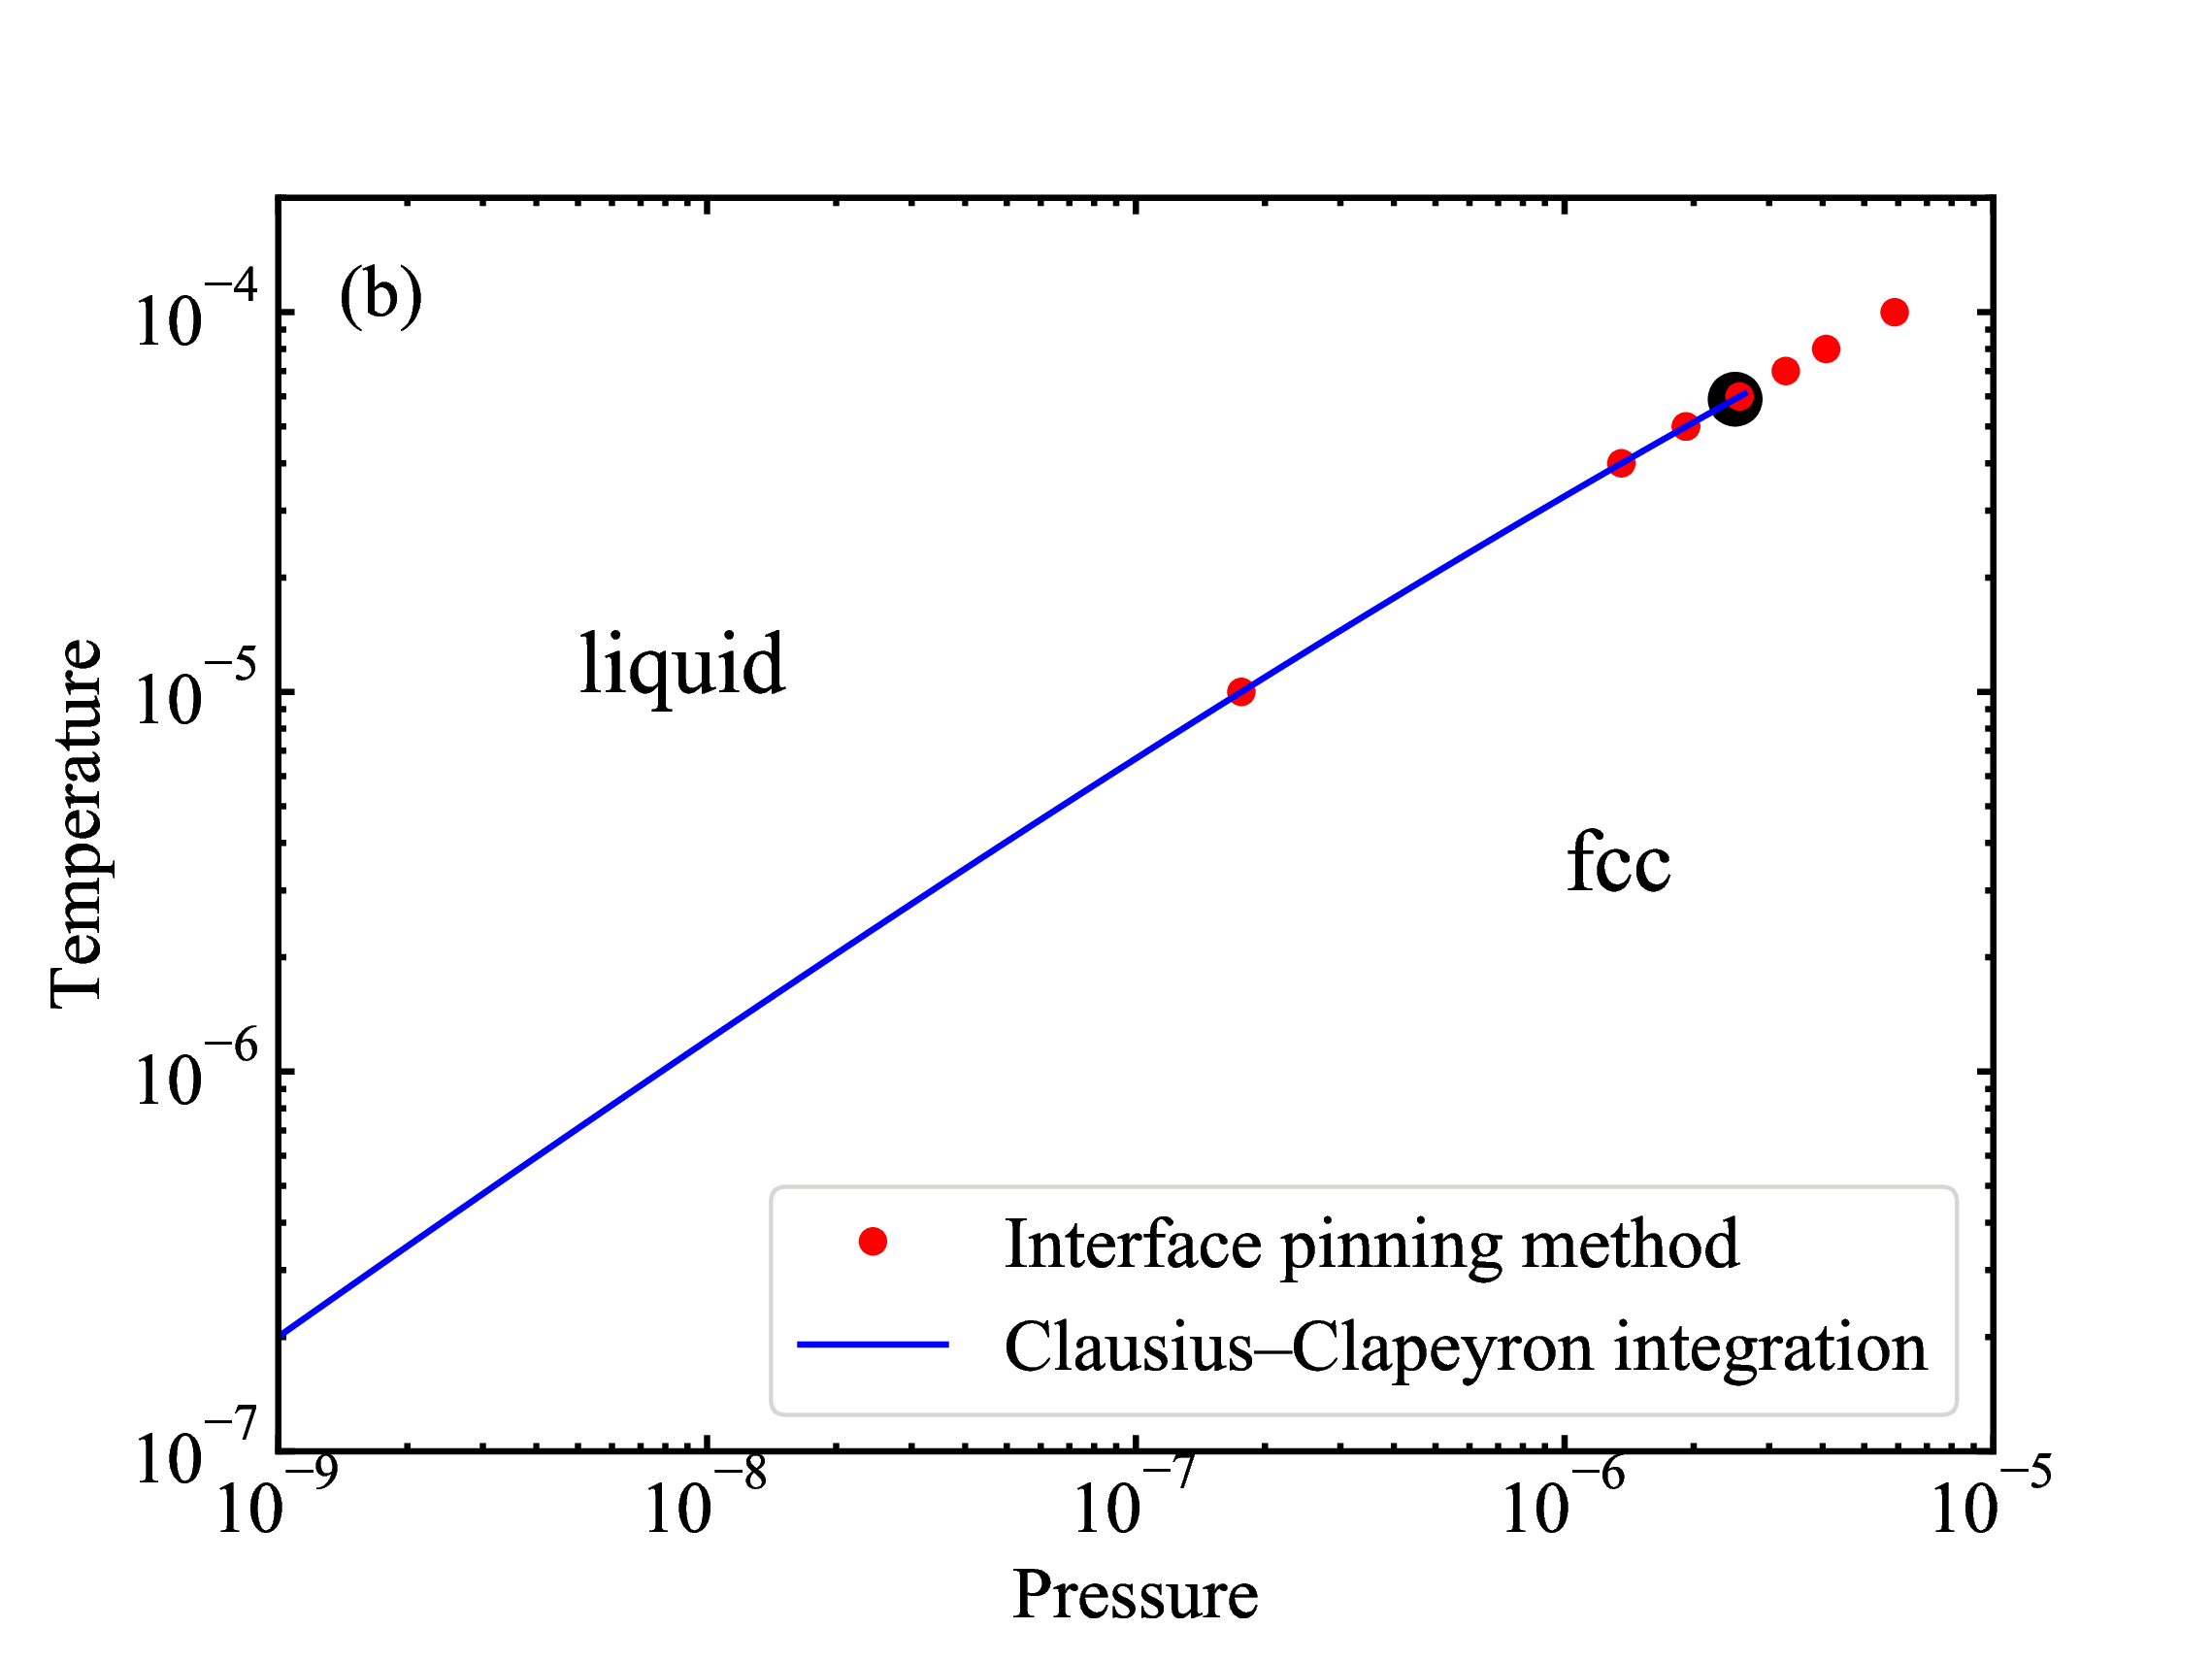 JCP_150_174501_2019_data/fig/fig7b.png